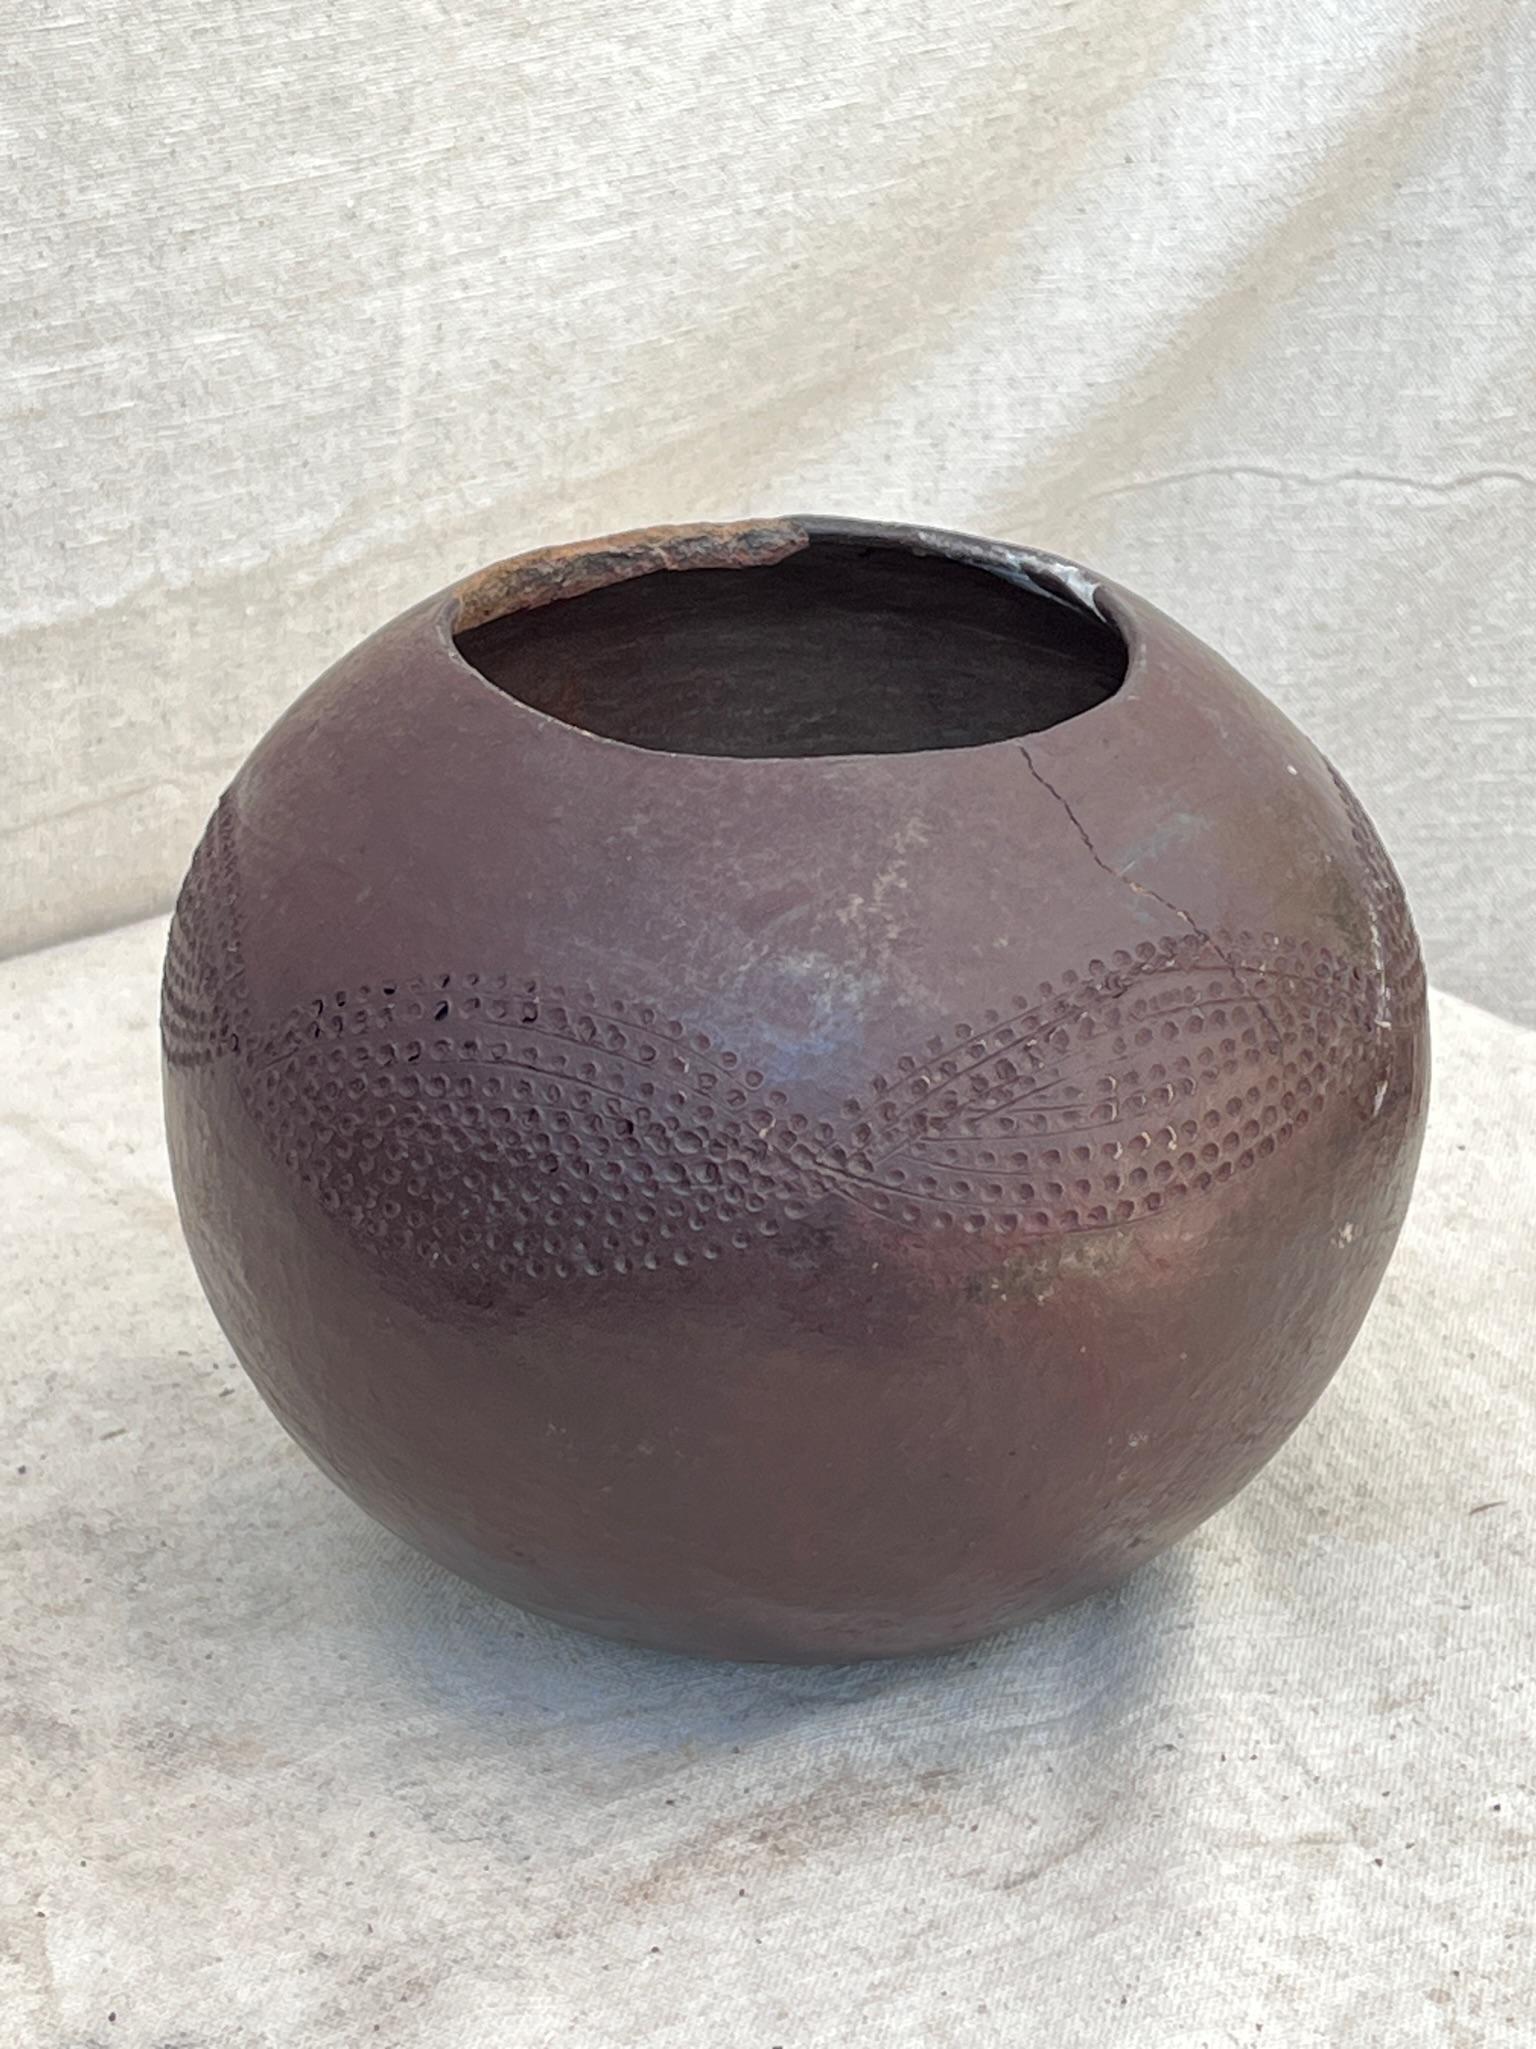 The early 20th-century South African clay beer pot from the Zulu culture is a spherical beer pot showcasing faintly incised decorations at its midsection, offering a glimpse into the artistry of that era.

Measures: 8” W X 7.5